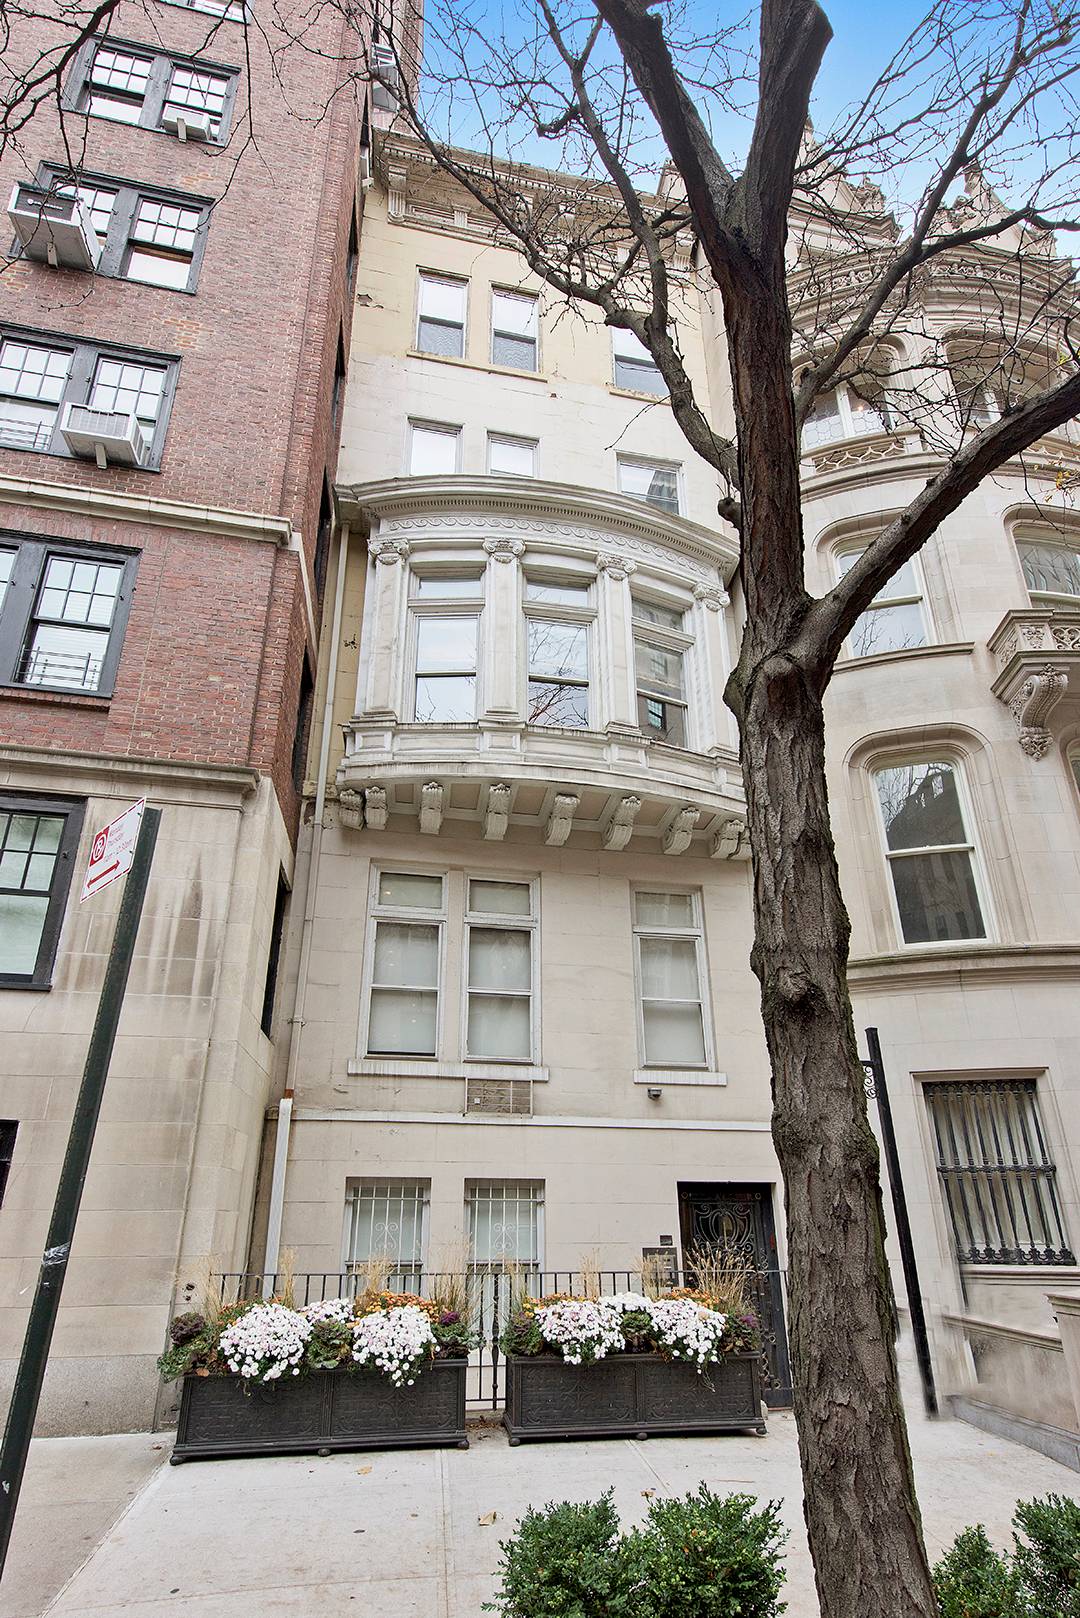  Convenient Plaza Location,Weekly Rental, Upper East Side, 64th Street, Park and Madison Ave,Townhome, Third Floor Walk Up, 